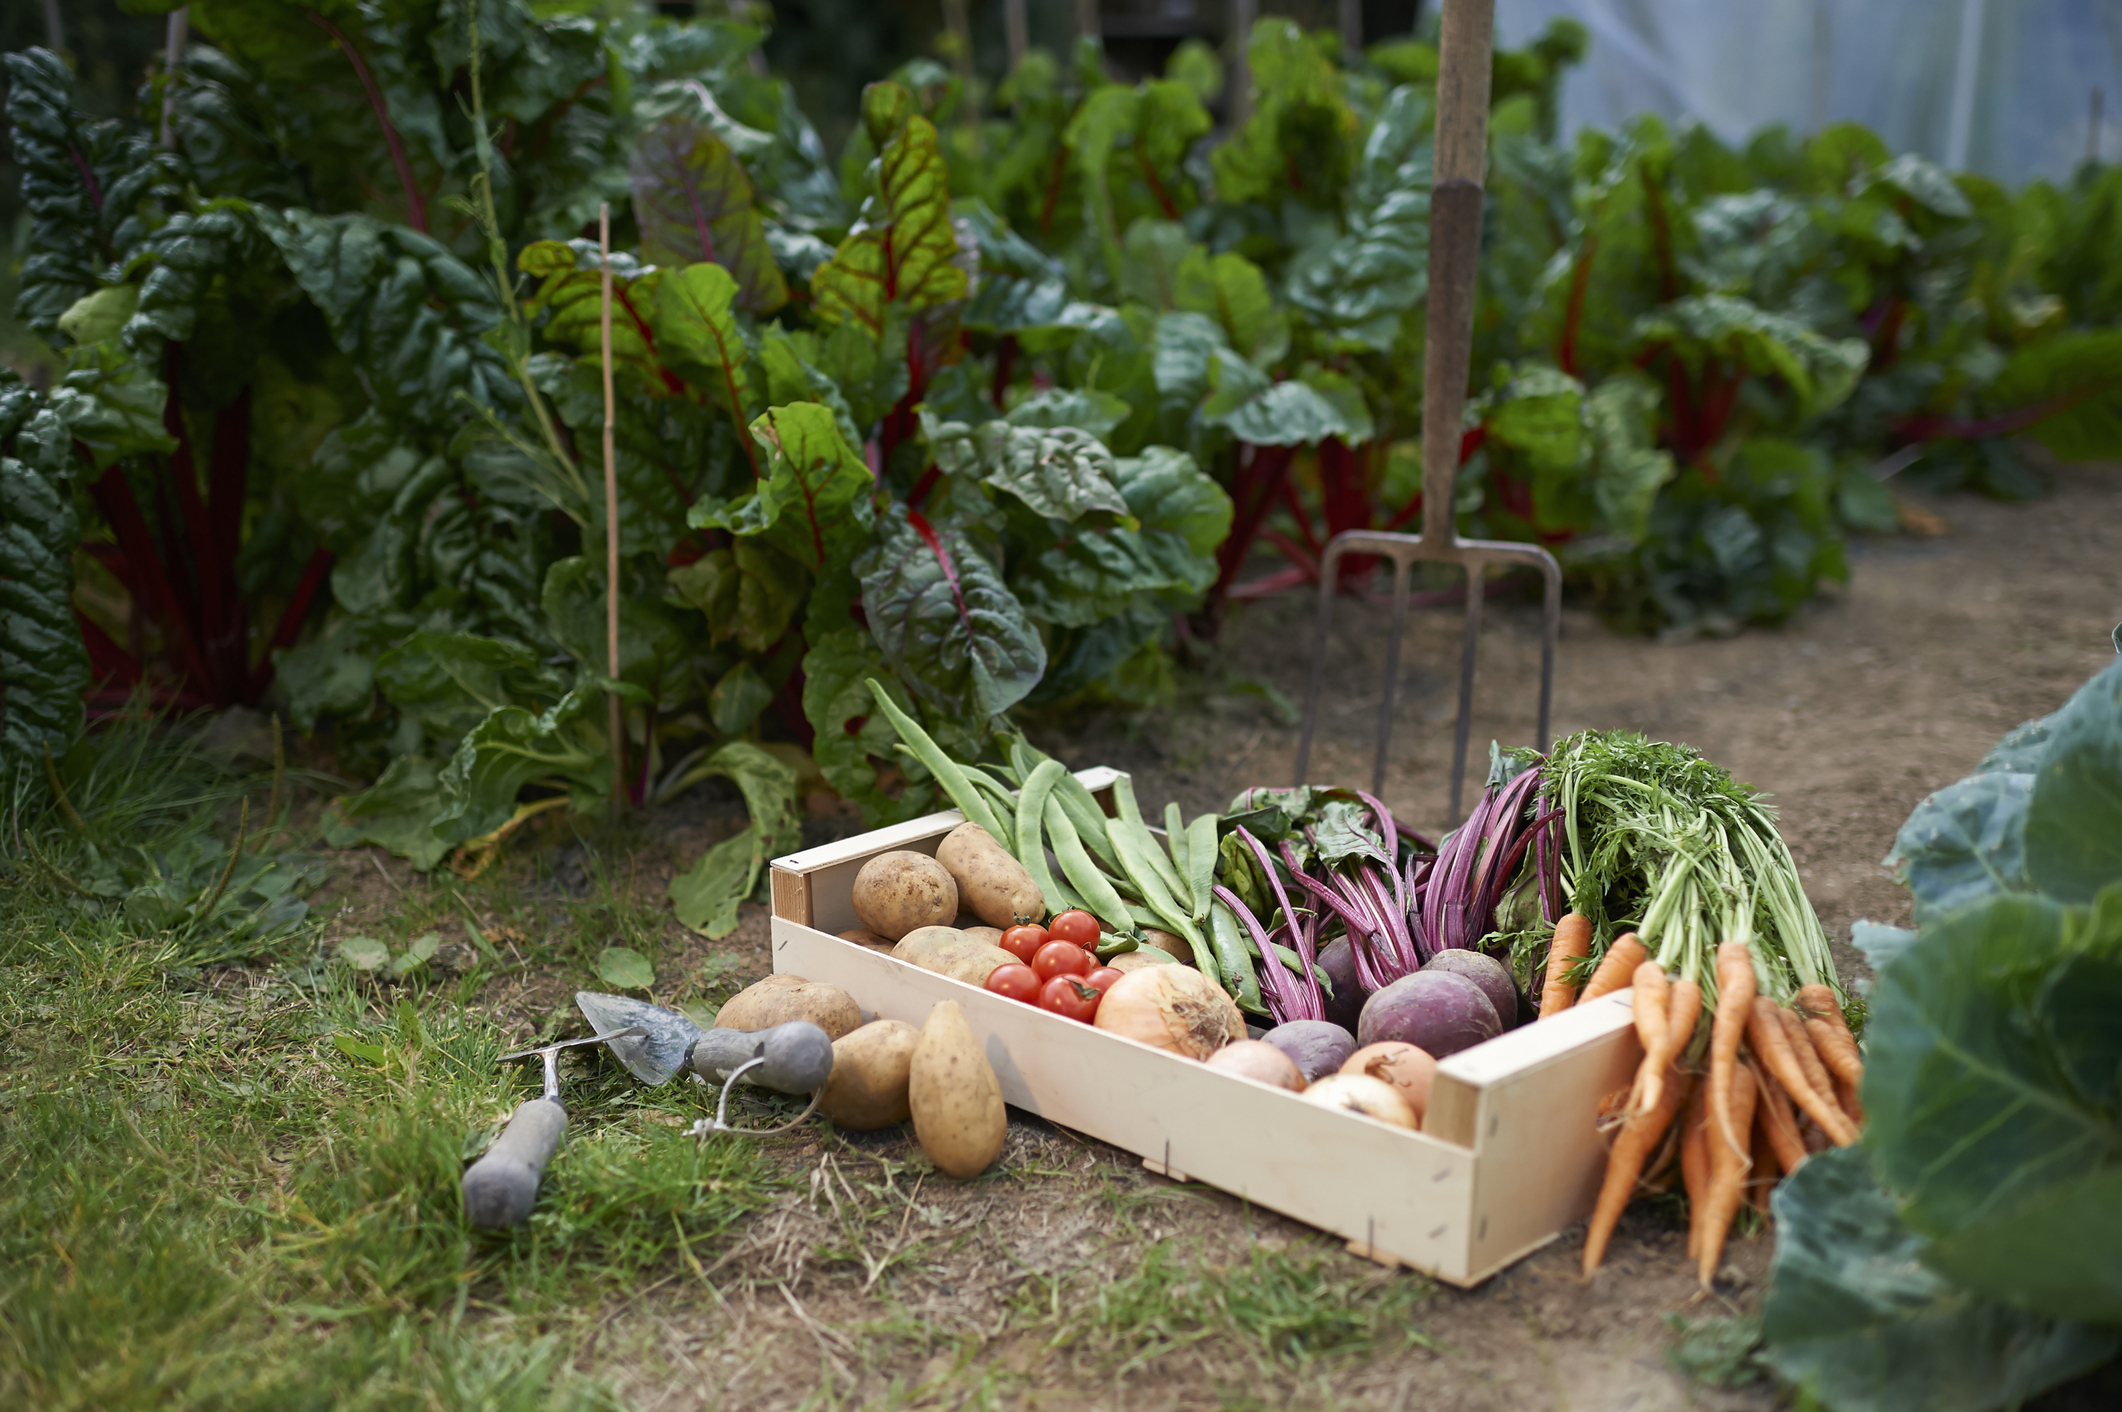 A wooden box filled with various freshly harvested vegetables, including carrots, beets, tomatoes, and potatoes, in a garden. Gardening tools are nearby